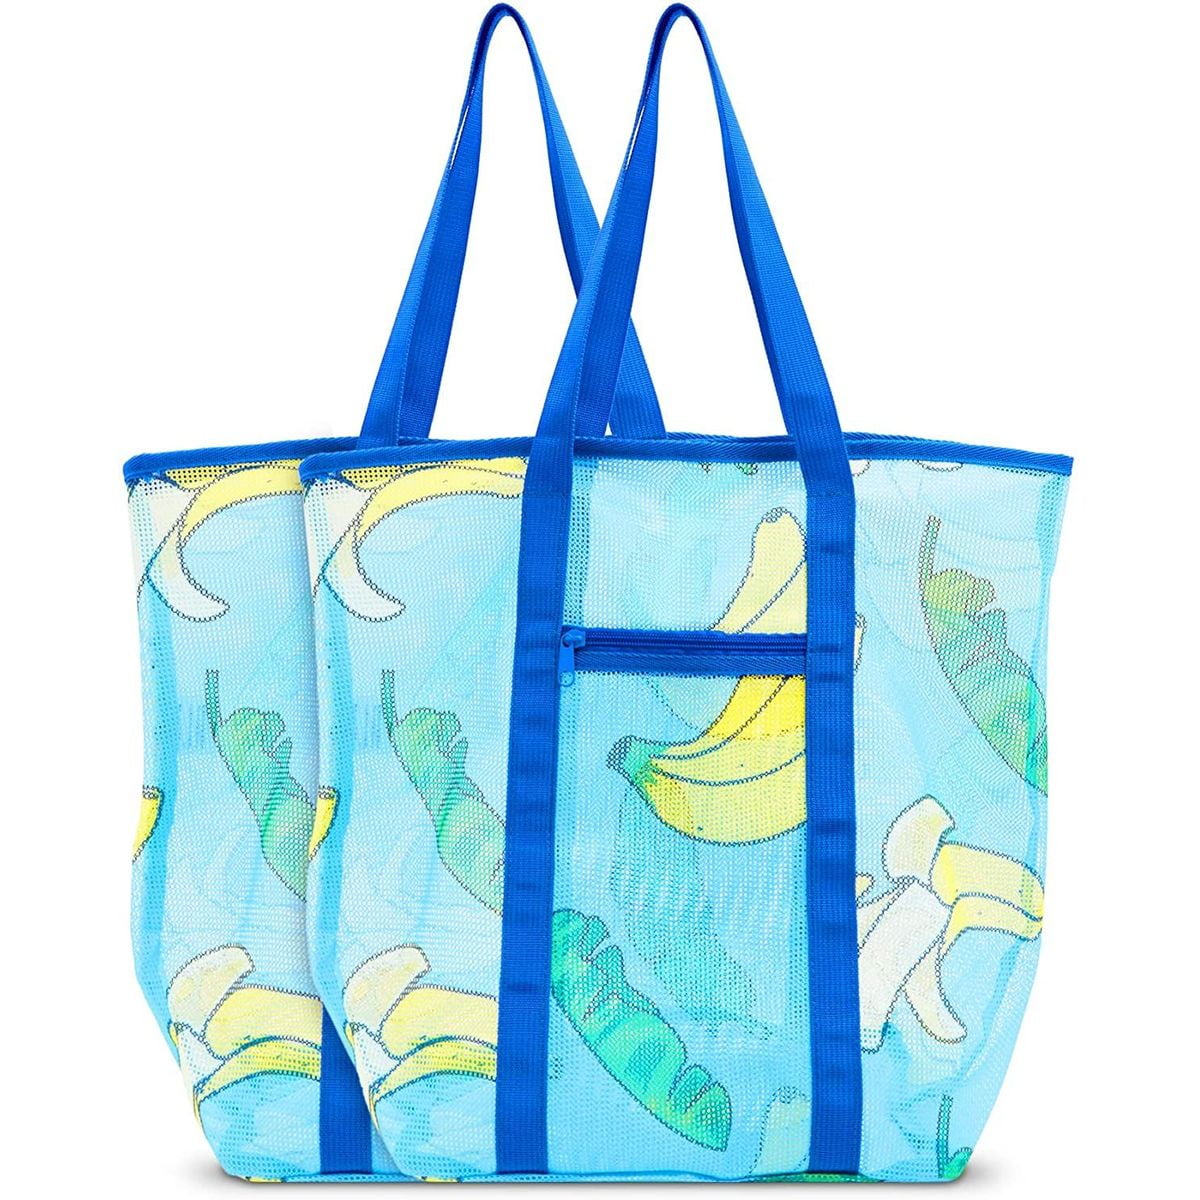 Pop-Up Beach Toy Basket Sand Toy Bag Large Capacity Beach Toy Bag Fenlosi Heavy Mesh Beach Tote Bag Used to Store Beach Toys and Towels Blue Shell Bag